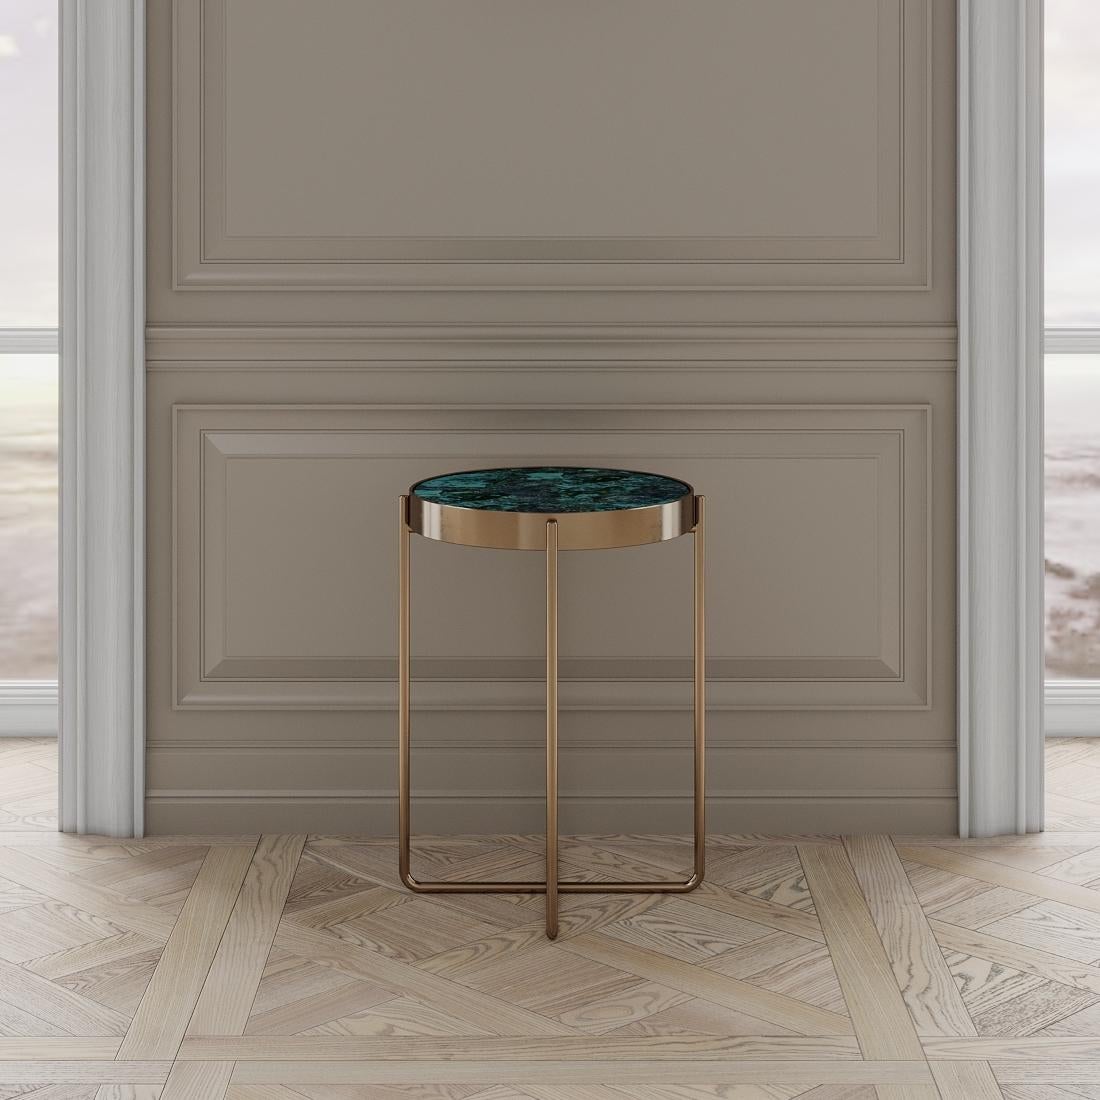 The Aura side table is designed by Emél & Browne in the minimalist and contemporary style and custom made in Italy by skilled artisans. The Aura side table instills the essence of dusk on the horizon. Agate Apatite Coroldite, mined in Italy shimmers